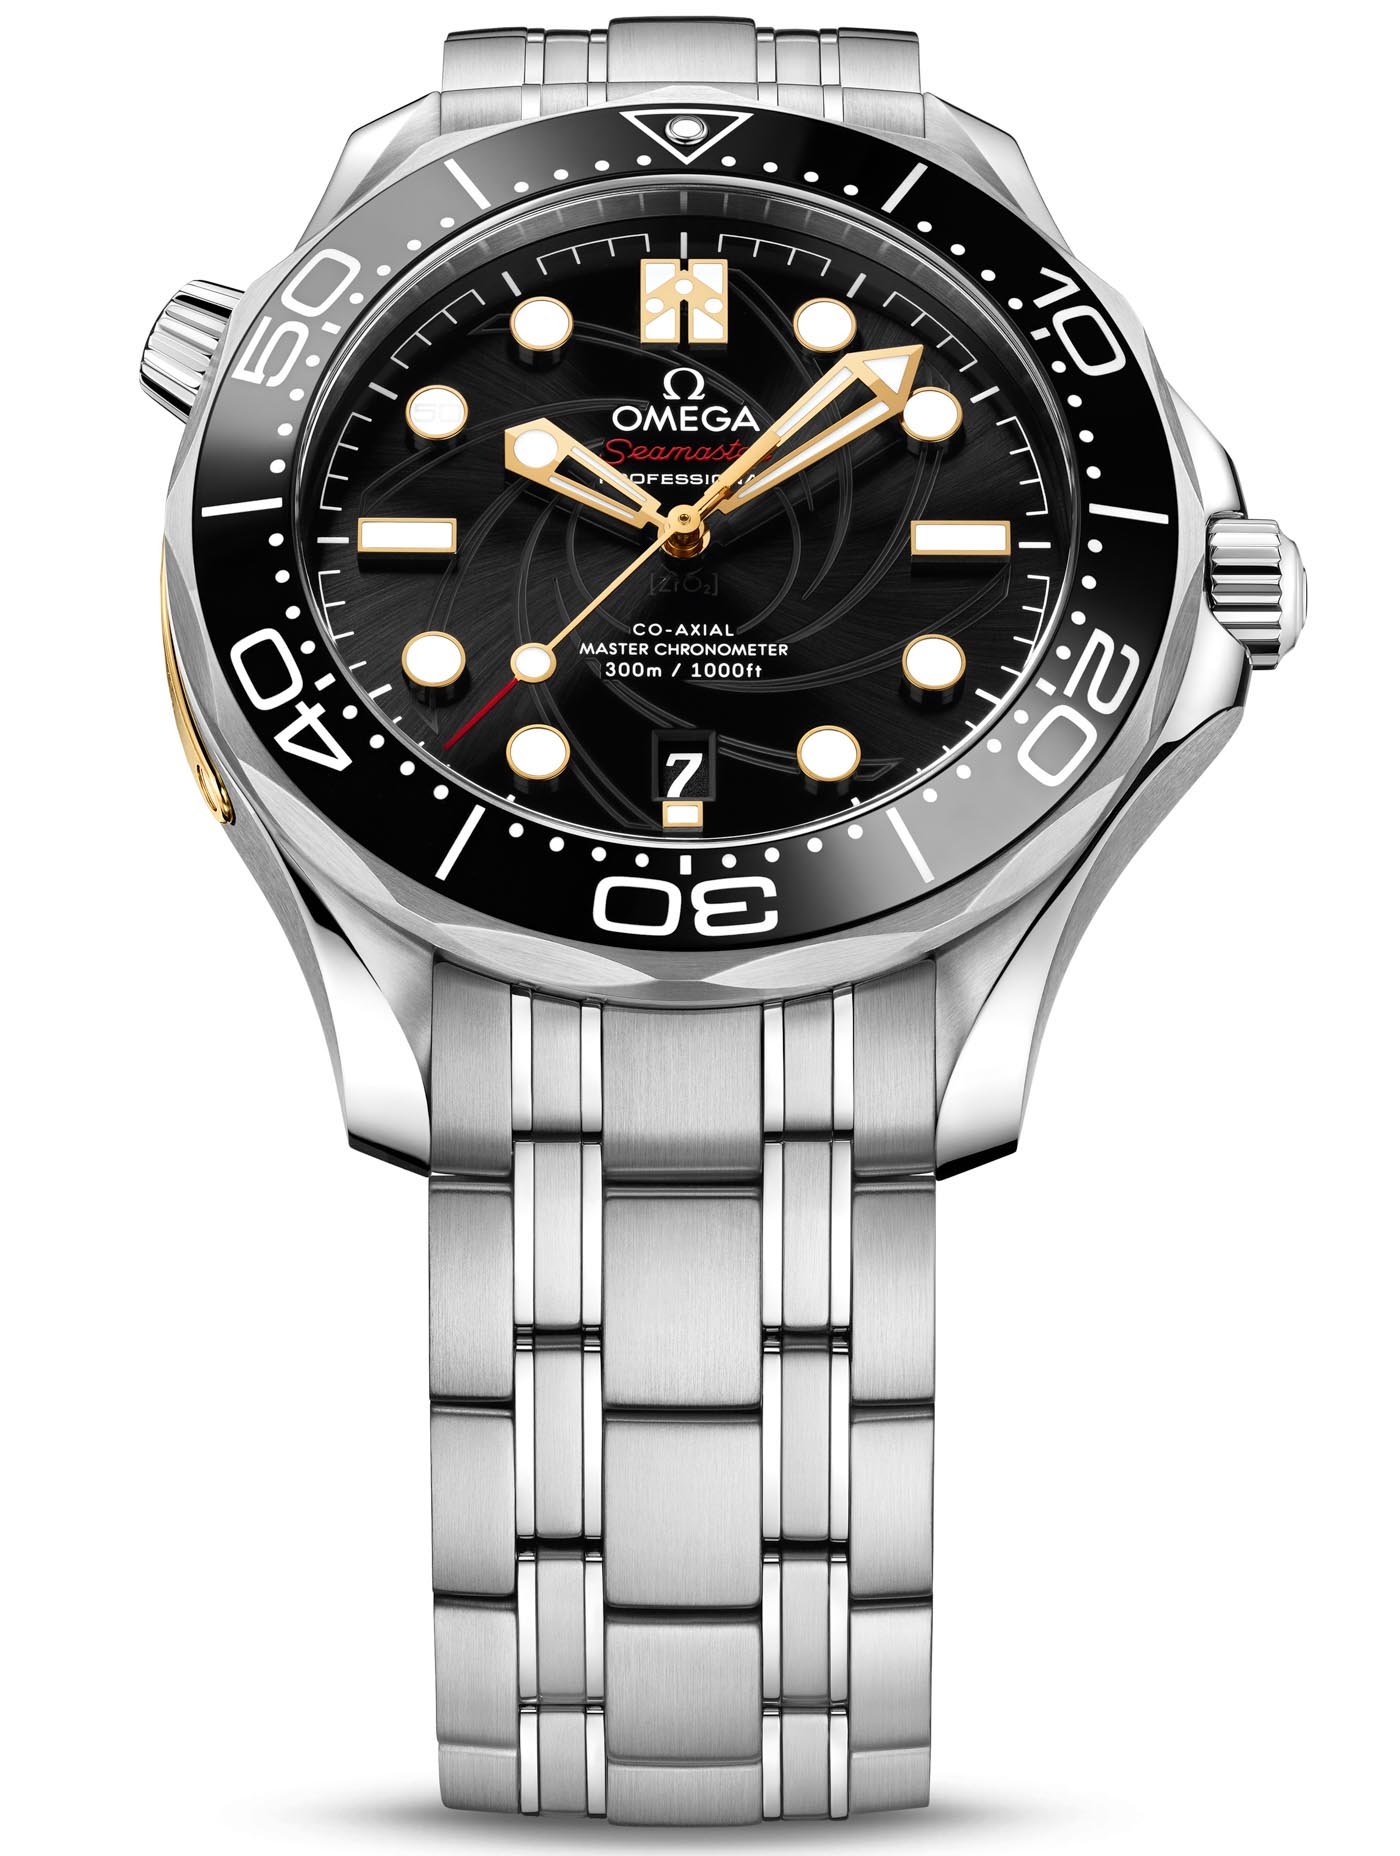 007 omega limited edition